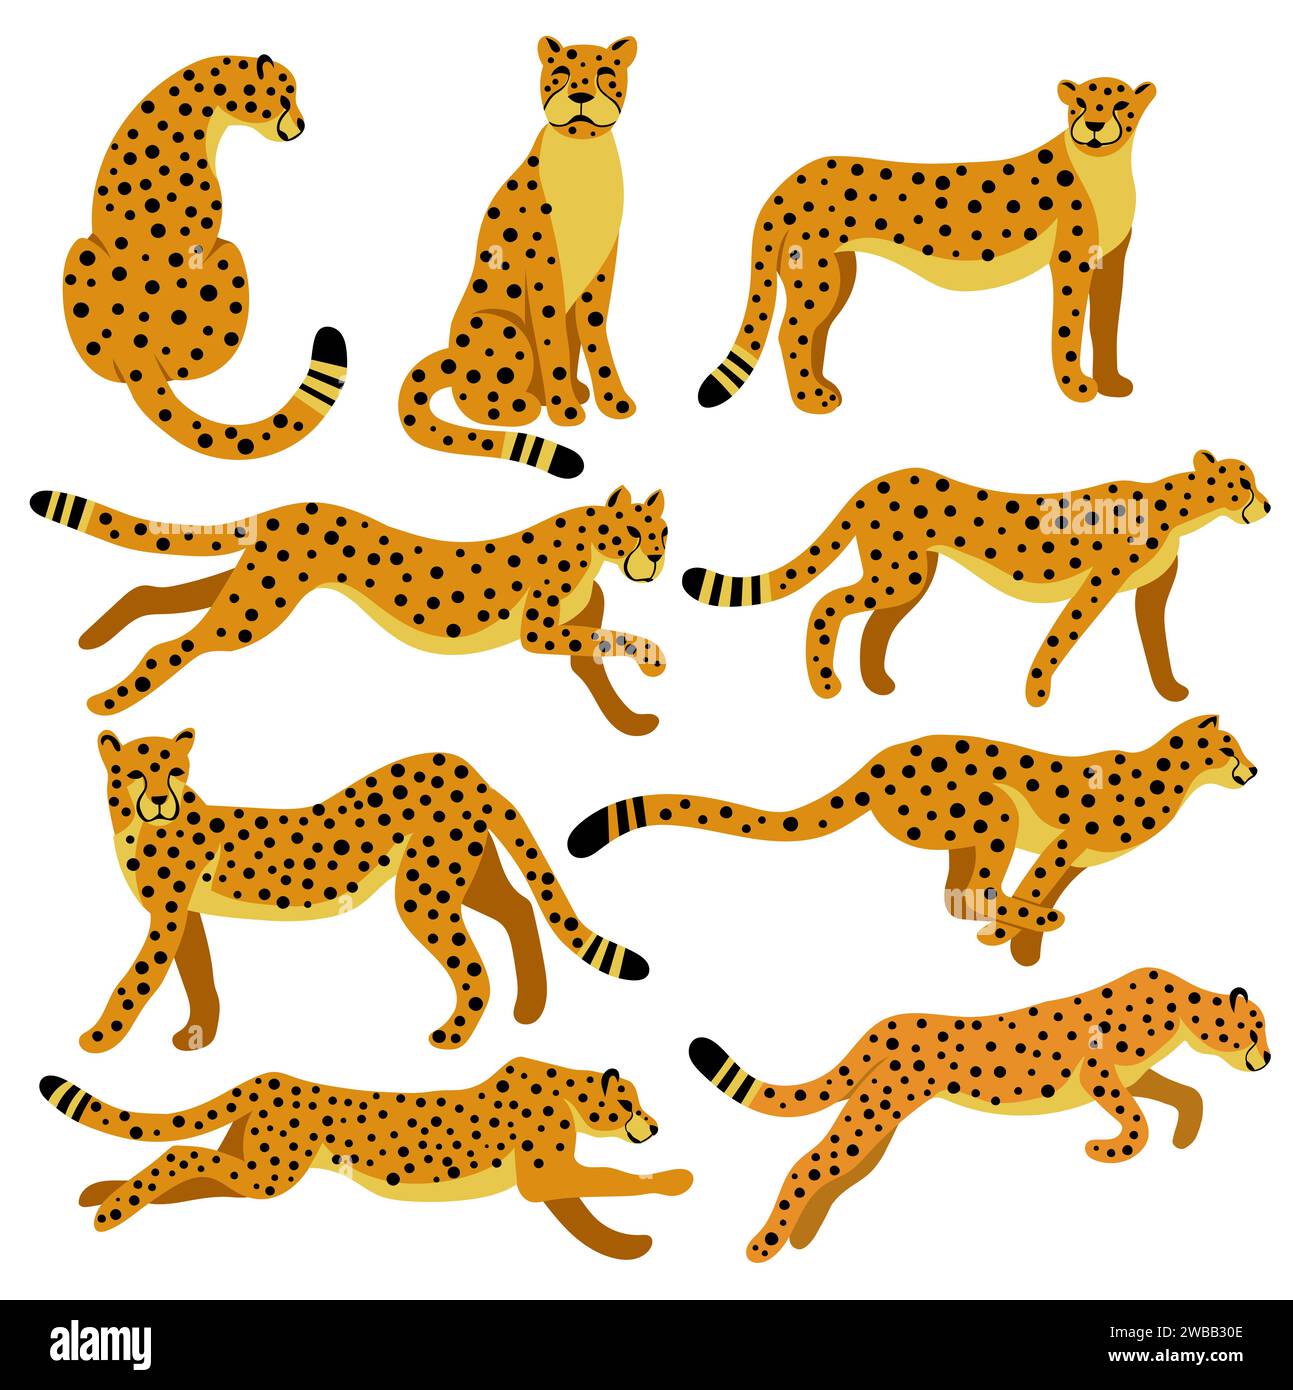 Cheetah Collection. Vector illustration of cartoon cheetahs in different actions like standing, jumping, hunting, running, walking. Isolated on white. Stock Vector